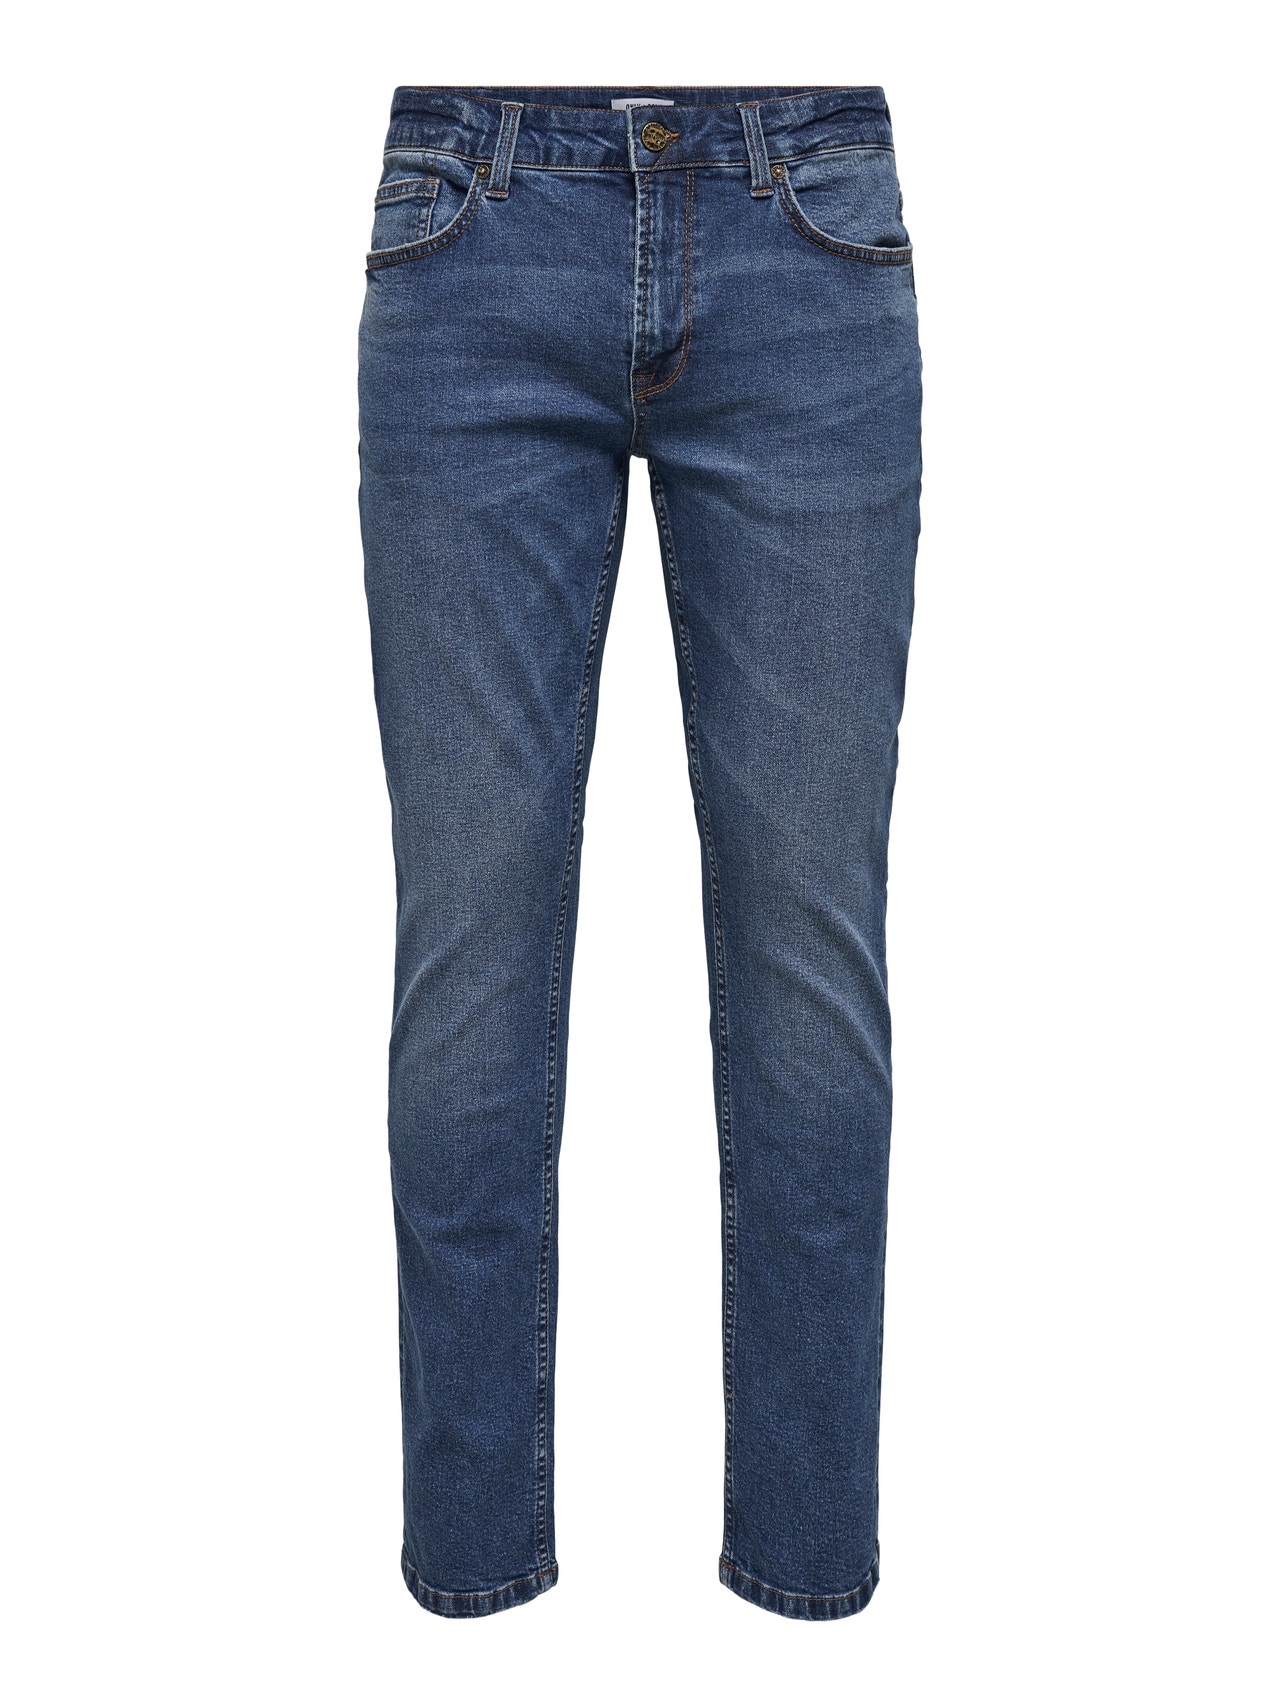 ONLY & SONS Jeans Regular Fit Taille moyenne -Blue Denim - 22020769